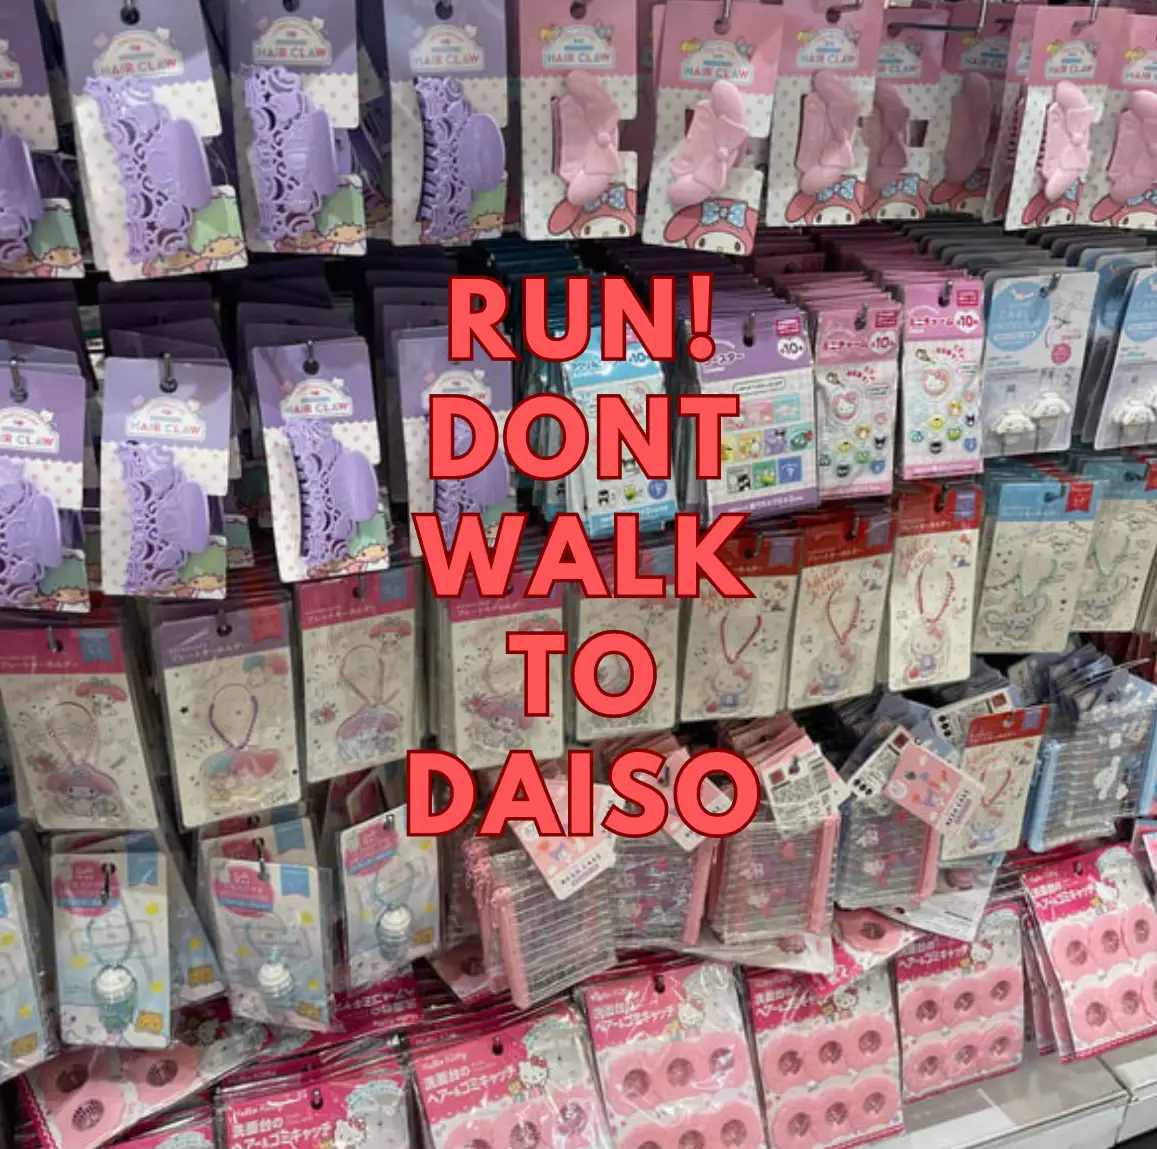 RUN! DONT WALK TO DAISO's images